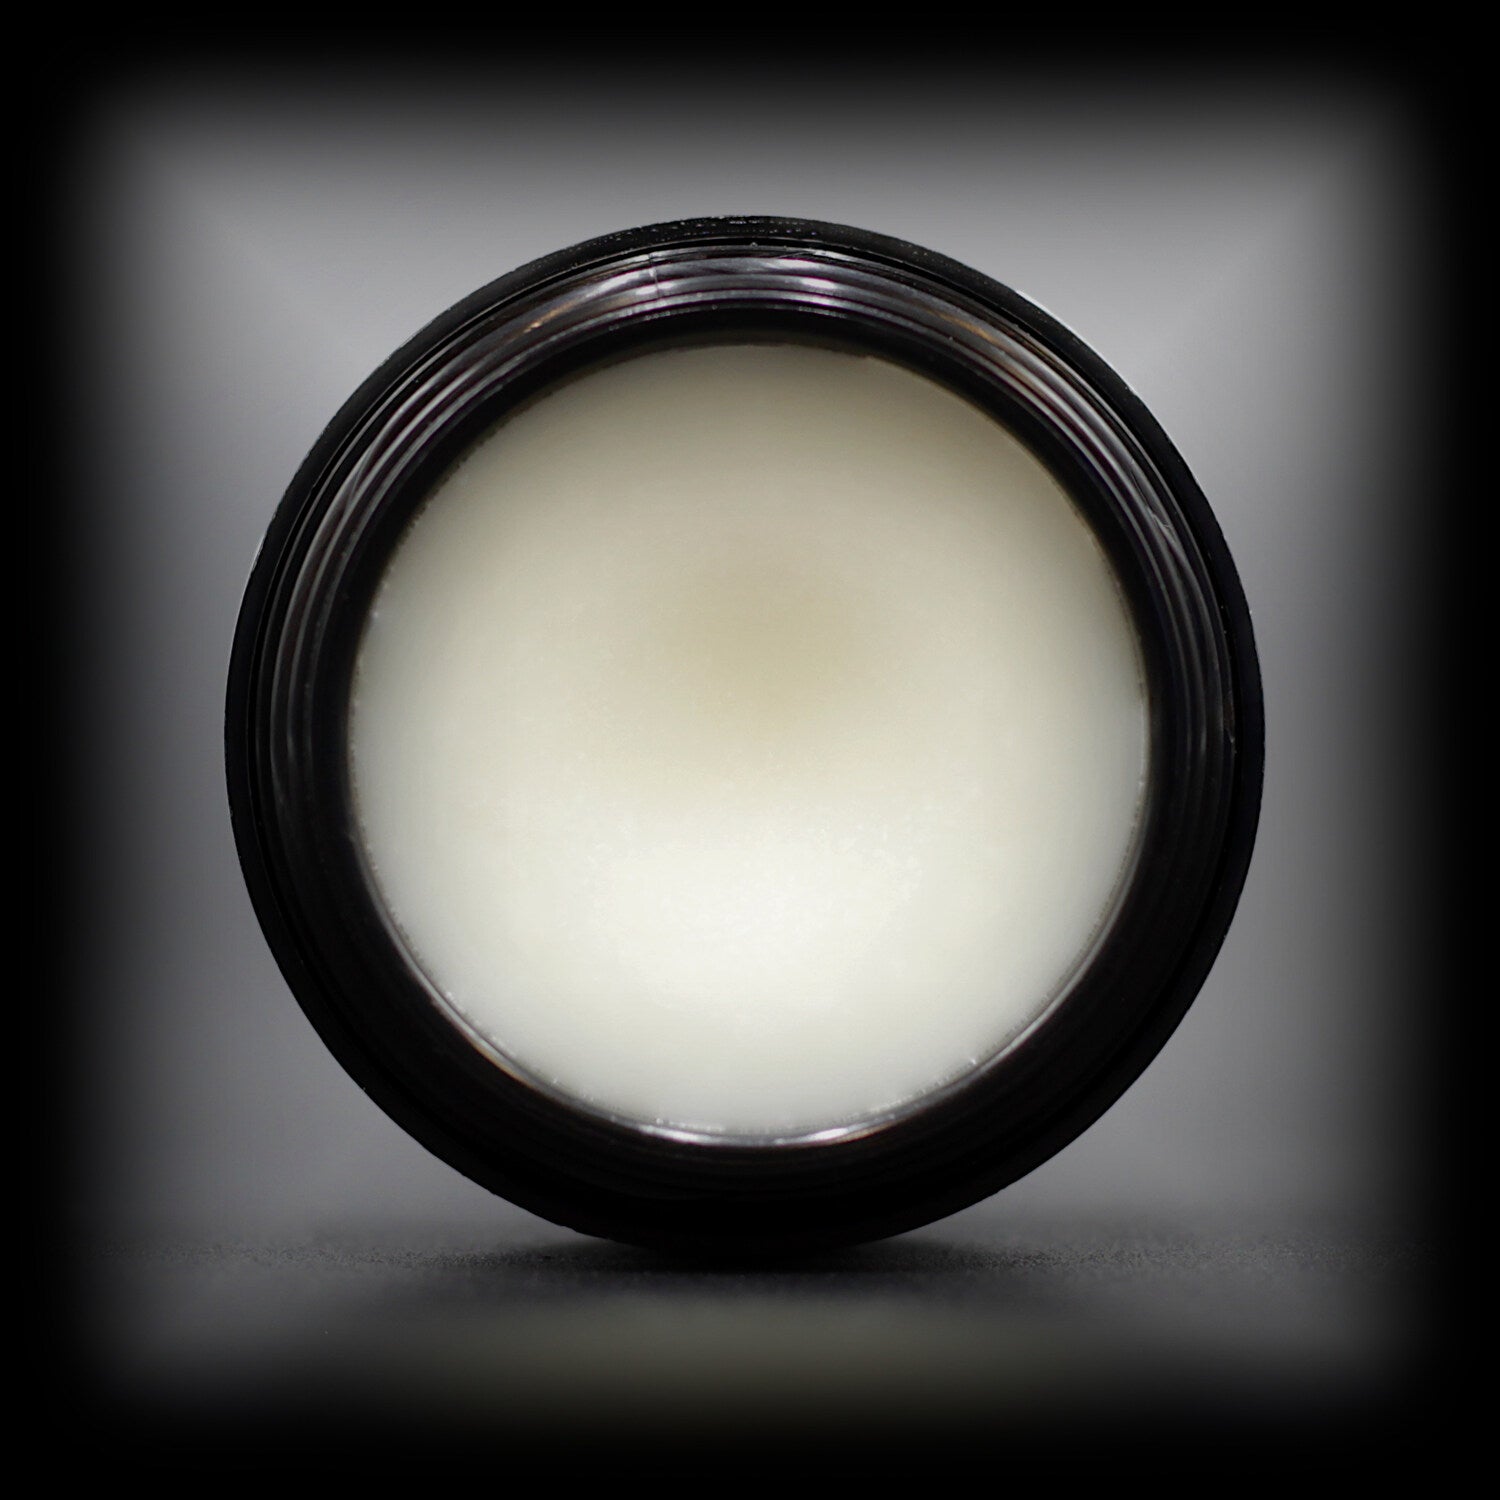 Naturally Wicked Coconut Lip Balm Exposed As White, Nourishing, Hydrating Natural Wax Balm